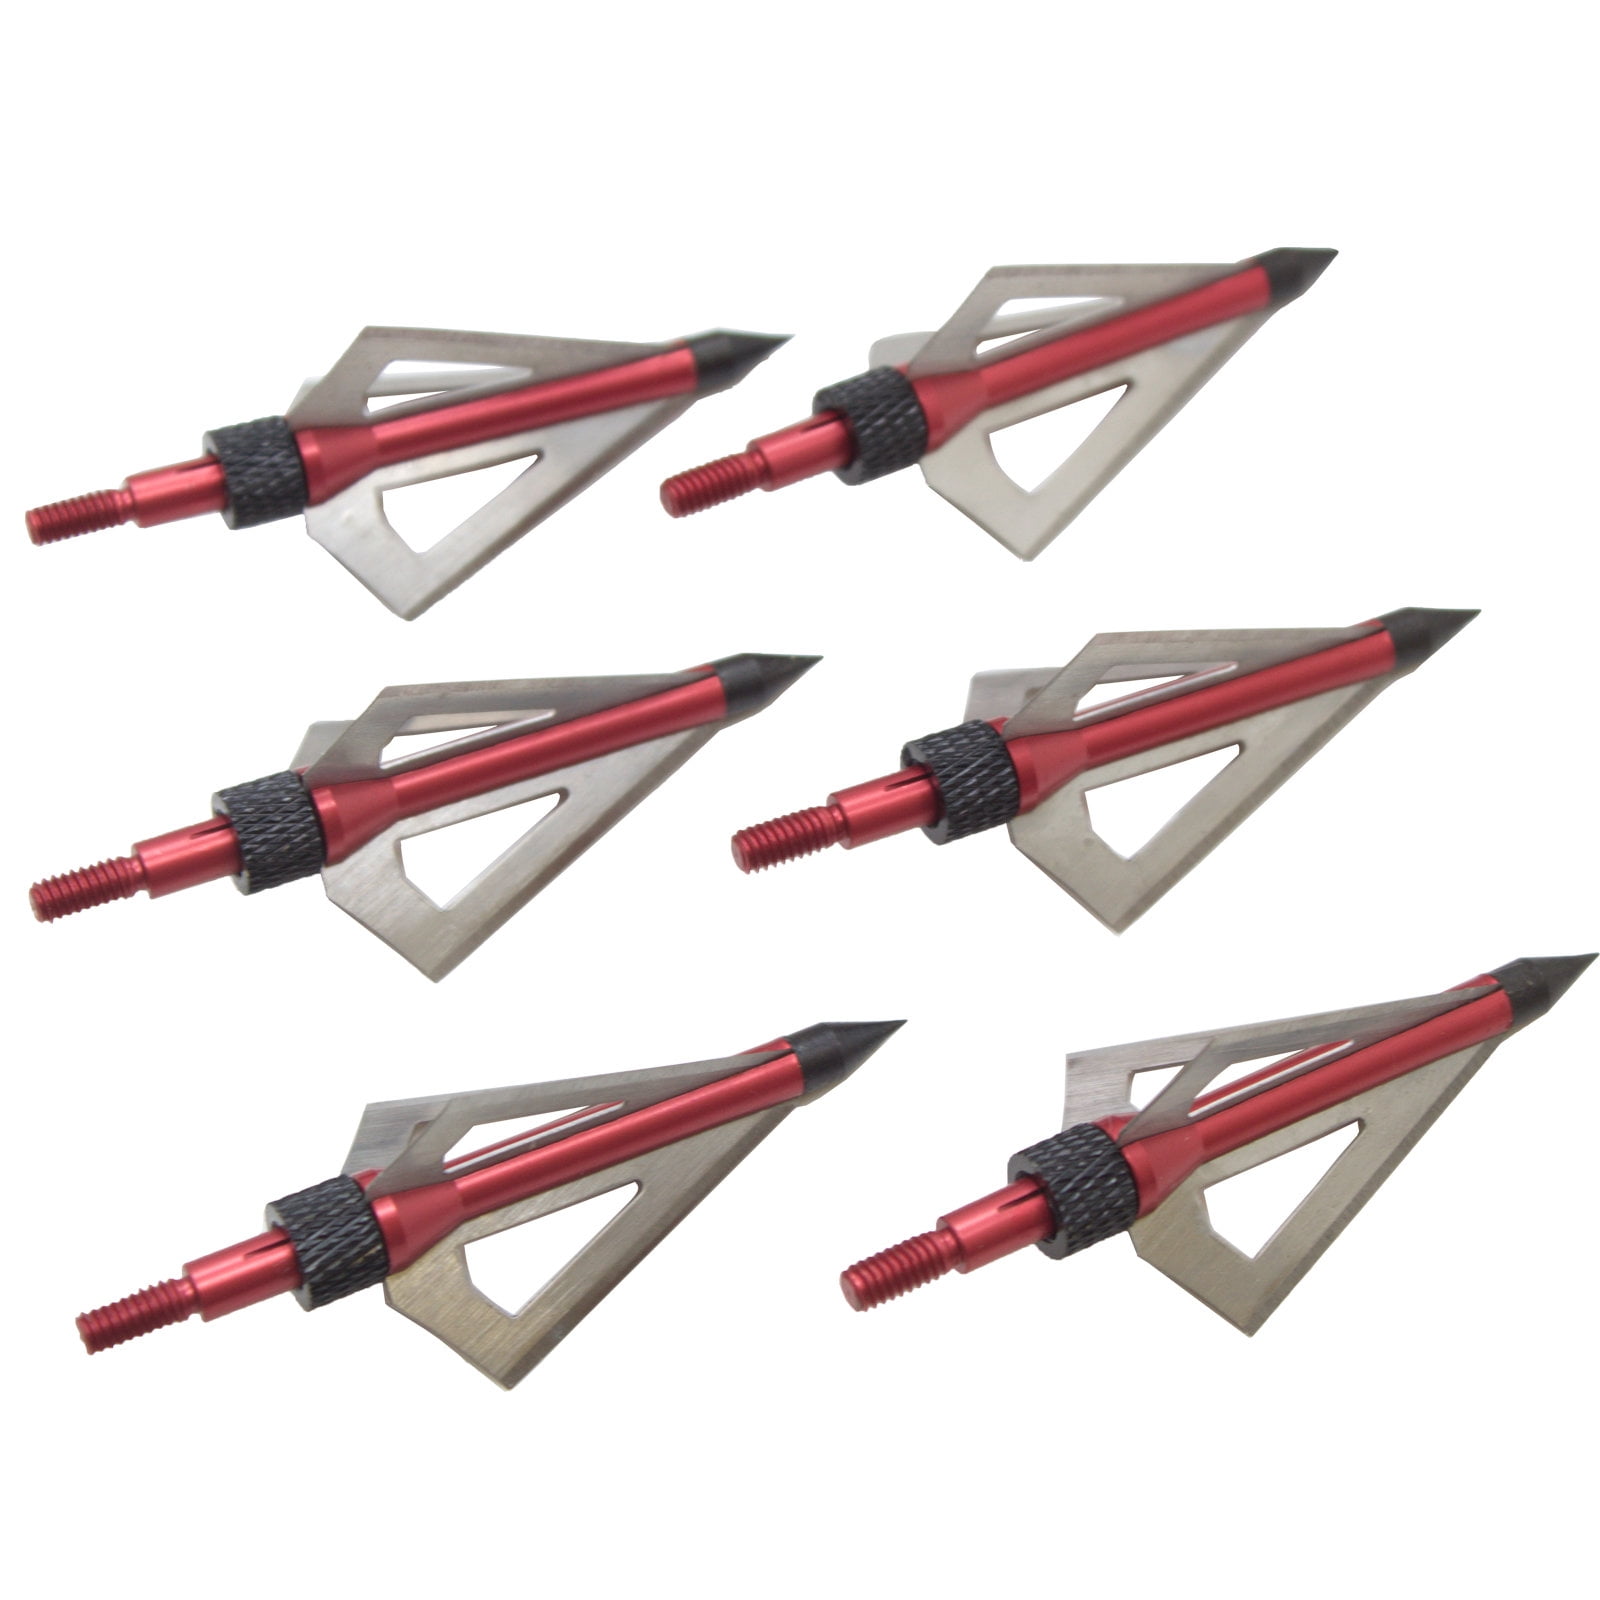 Details about   24PCS 100grain 3 Blade Crossed Broadhead Arrow Head Bow Archery For Hunting New